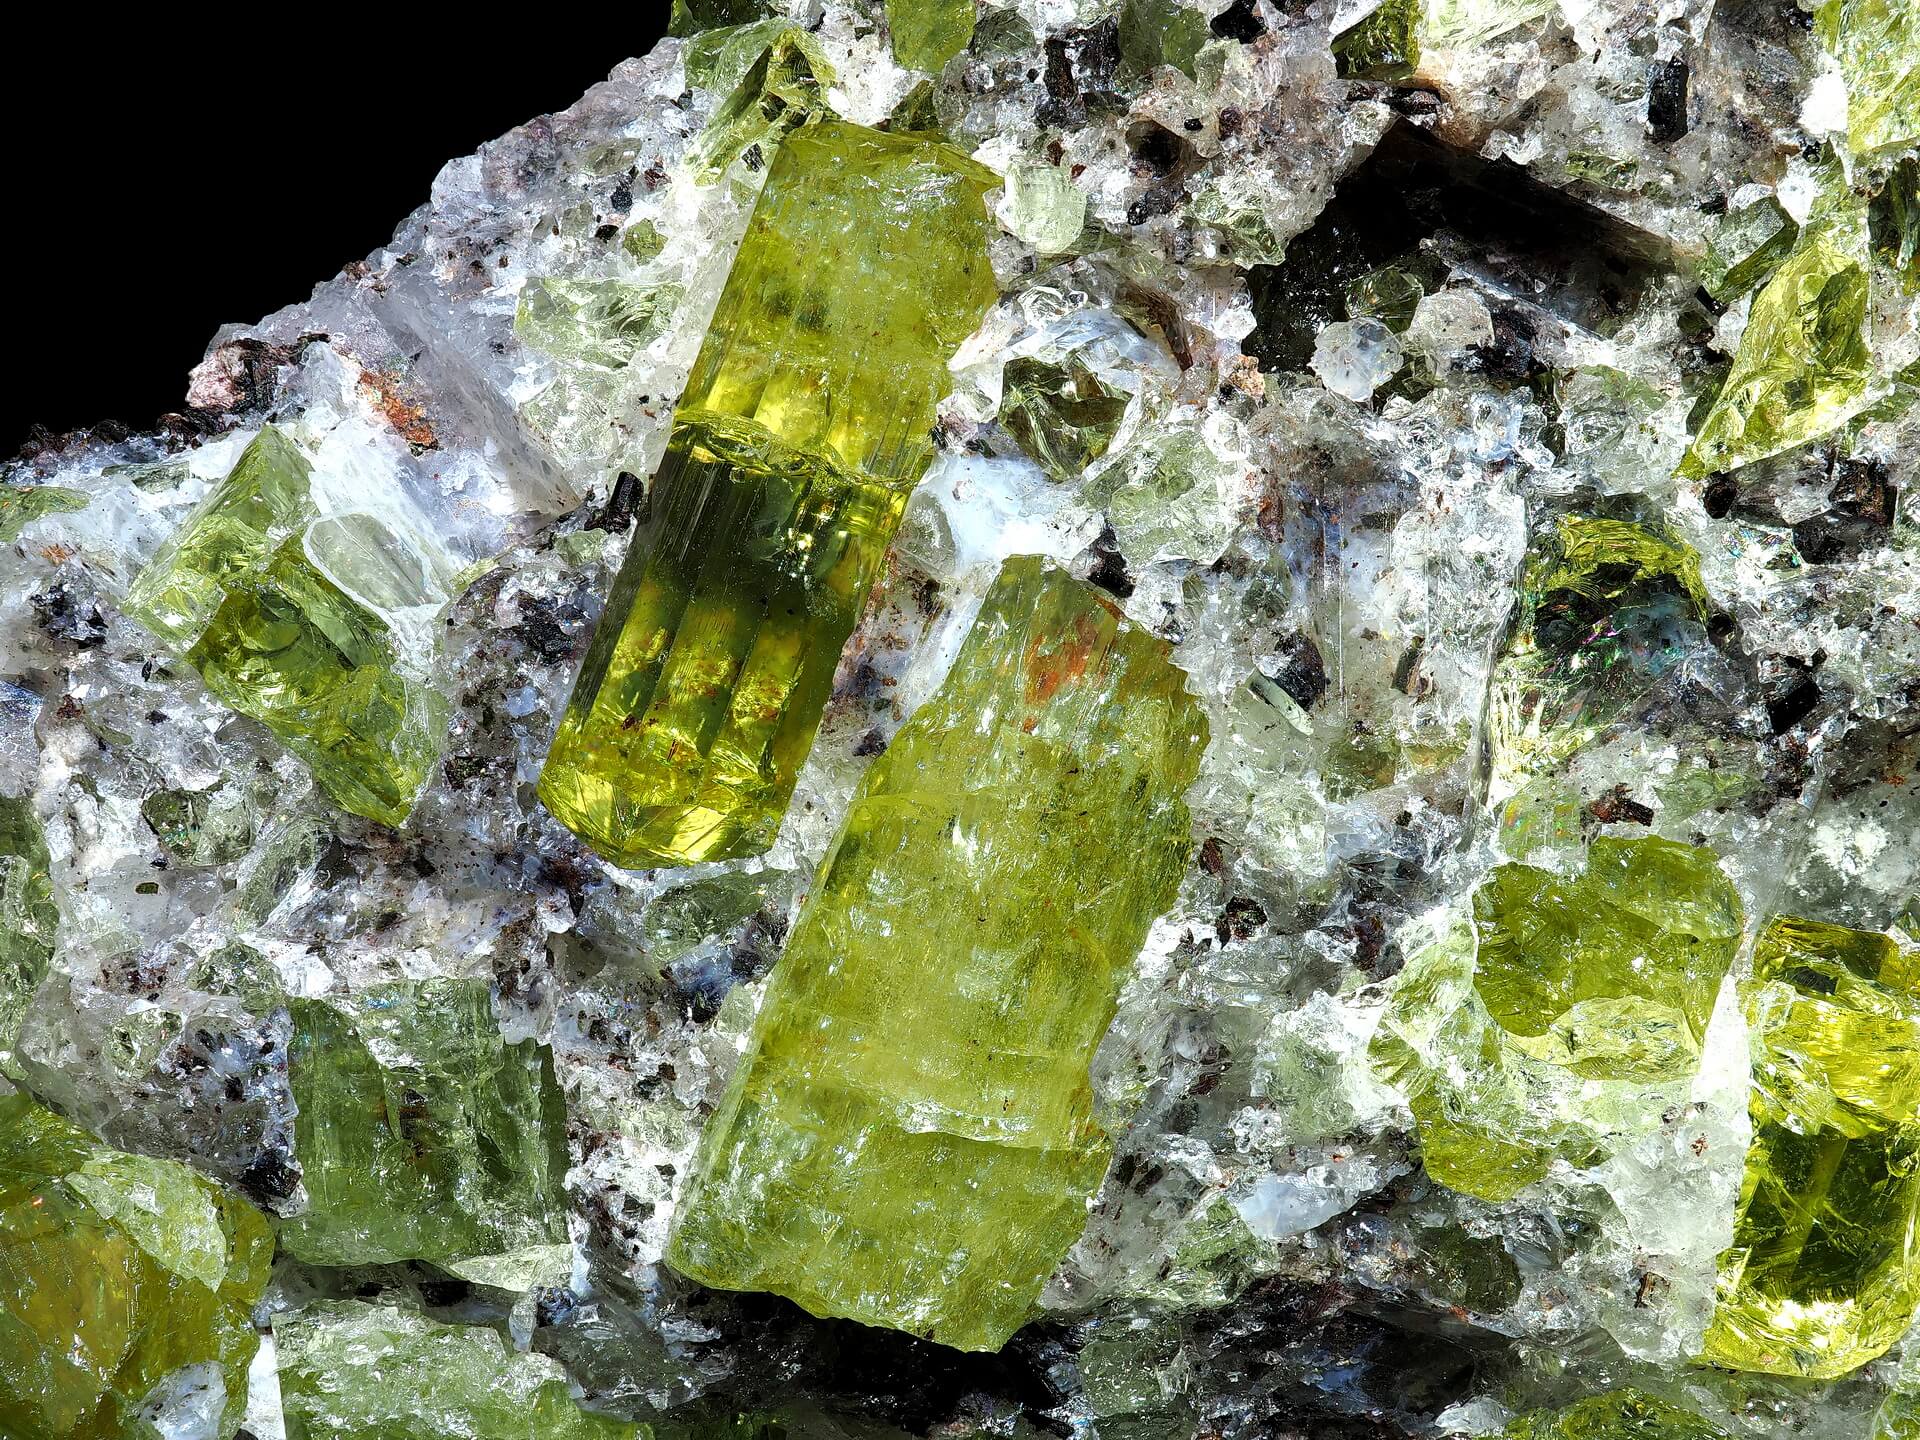 Close up view of multiple yellow Fluorapatite crystals surrounded by white Quartz and other minerals.